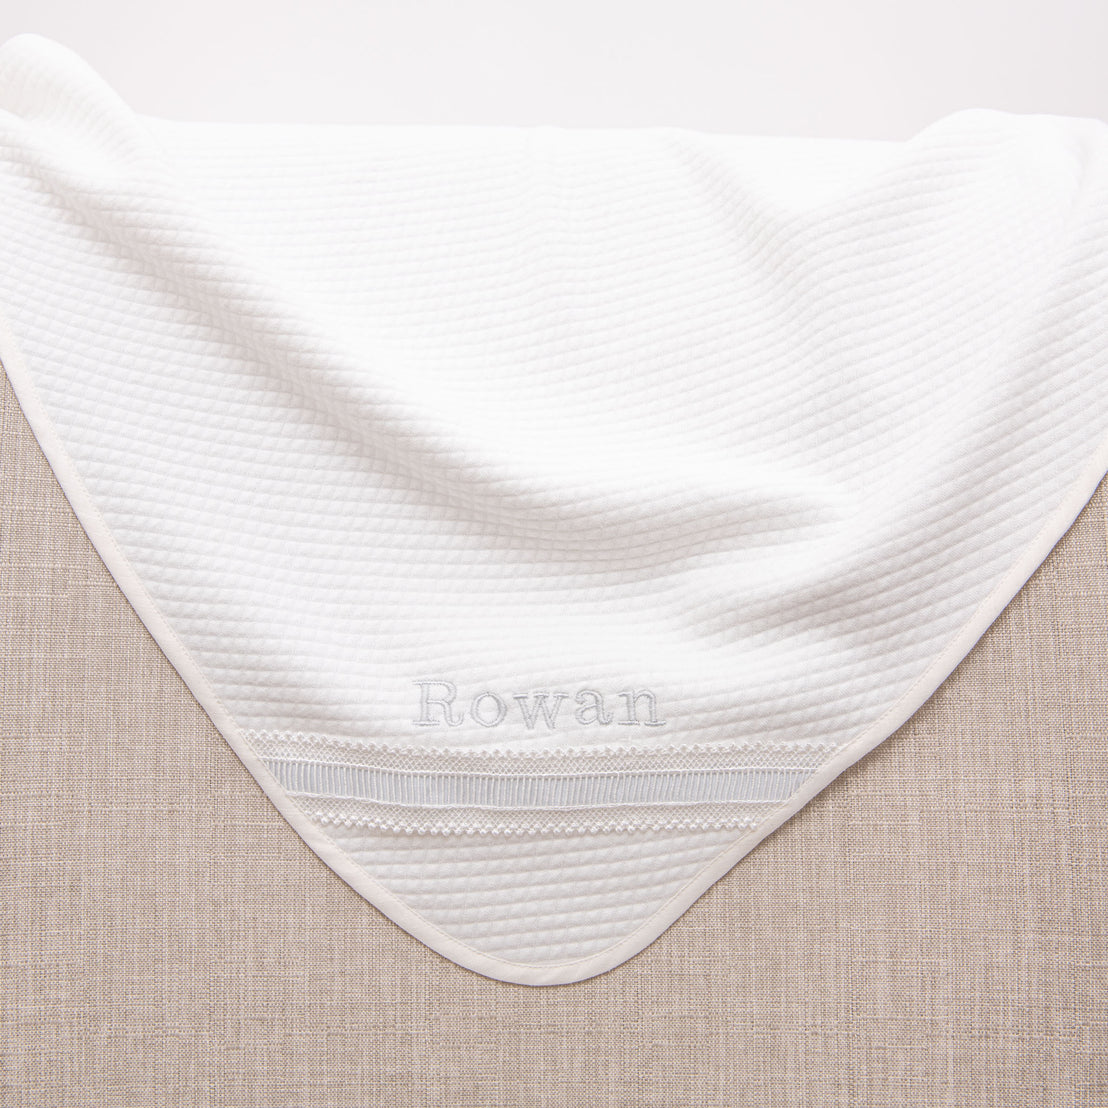 Hem detail on the personalized baptism blanket. Name 'Rowan' is embroidered in blue silk.